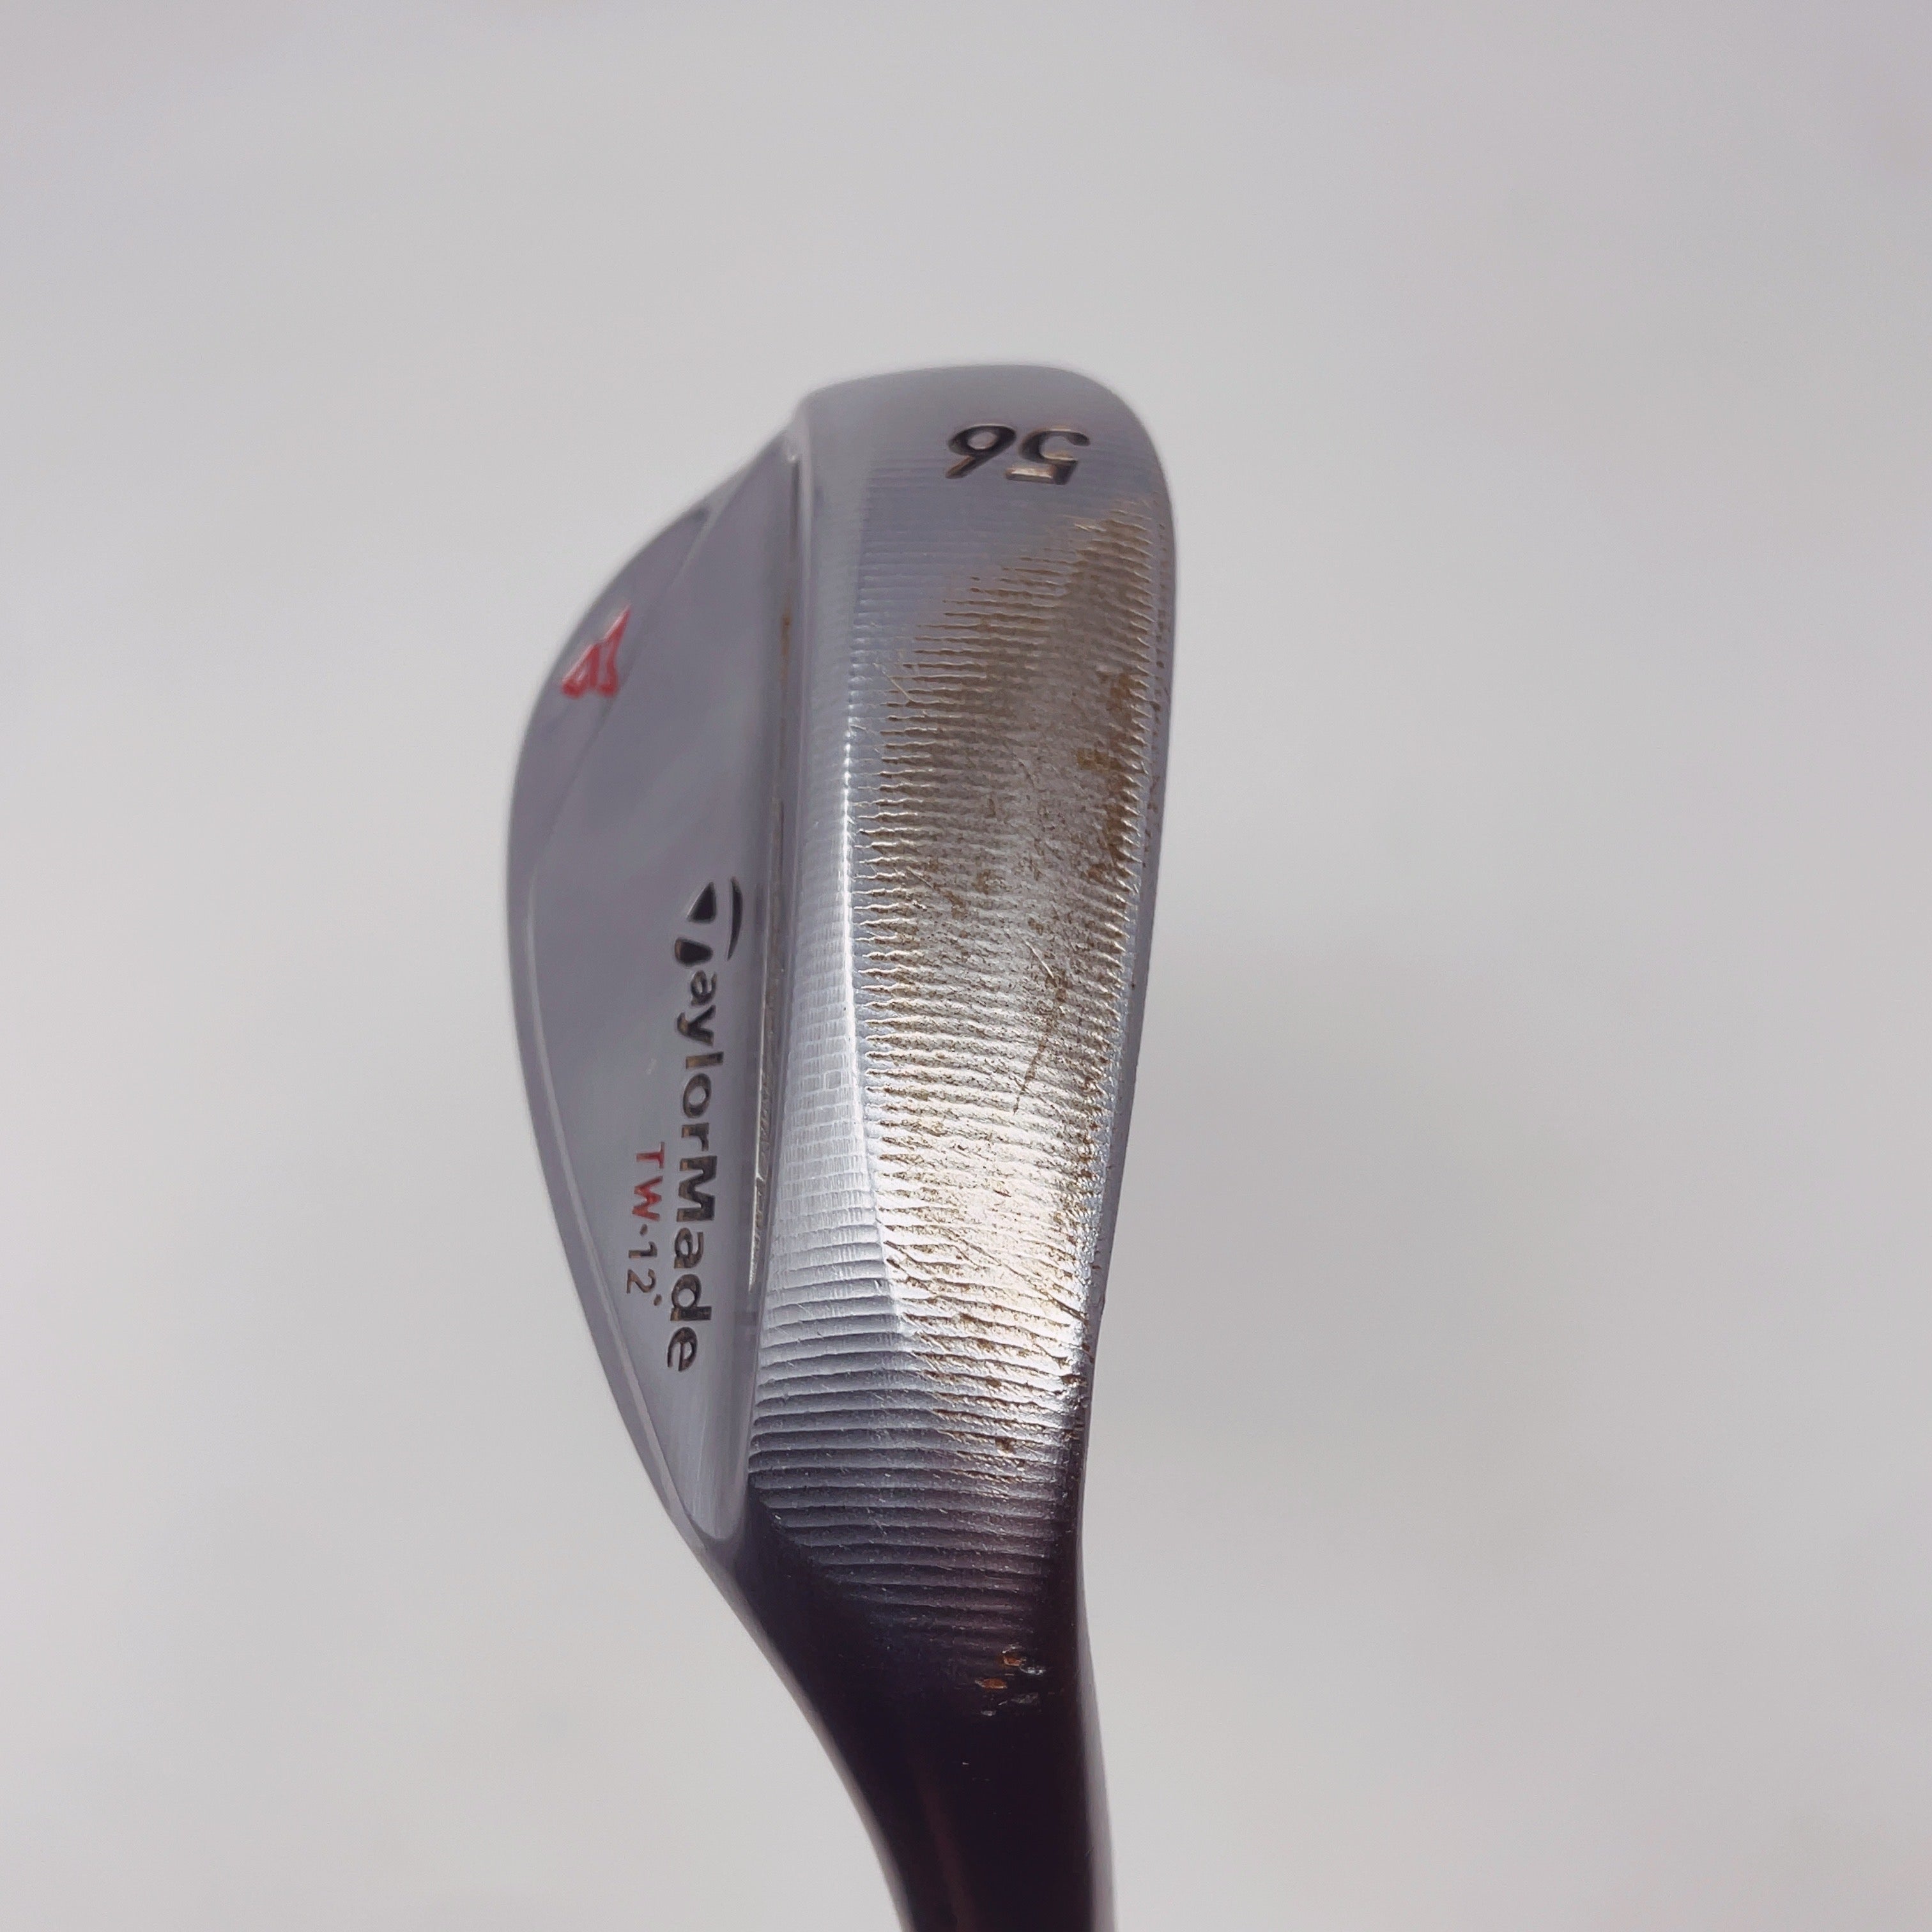 TAYLORMADE MILLED GRIND 2 TW WEDGE / 56 DEGREE / DYNAMIC GOLD S200 SHAFT